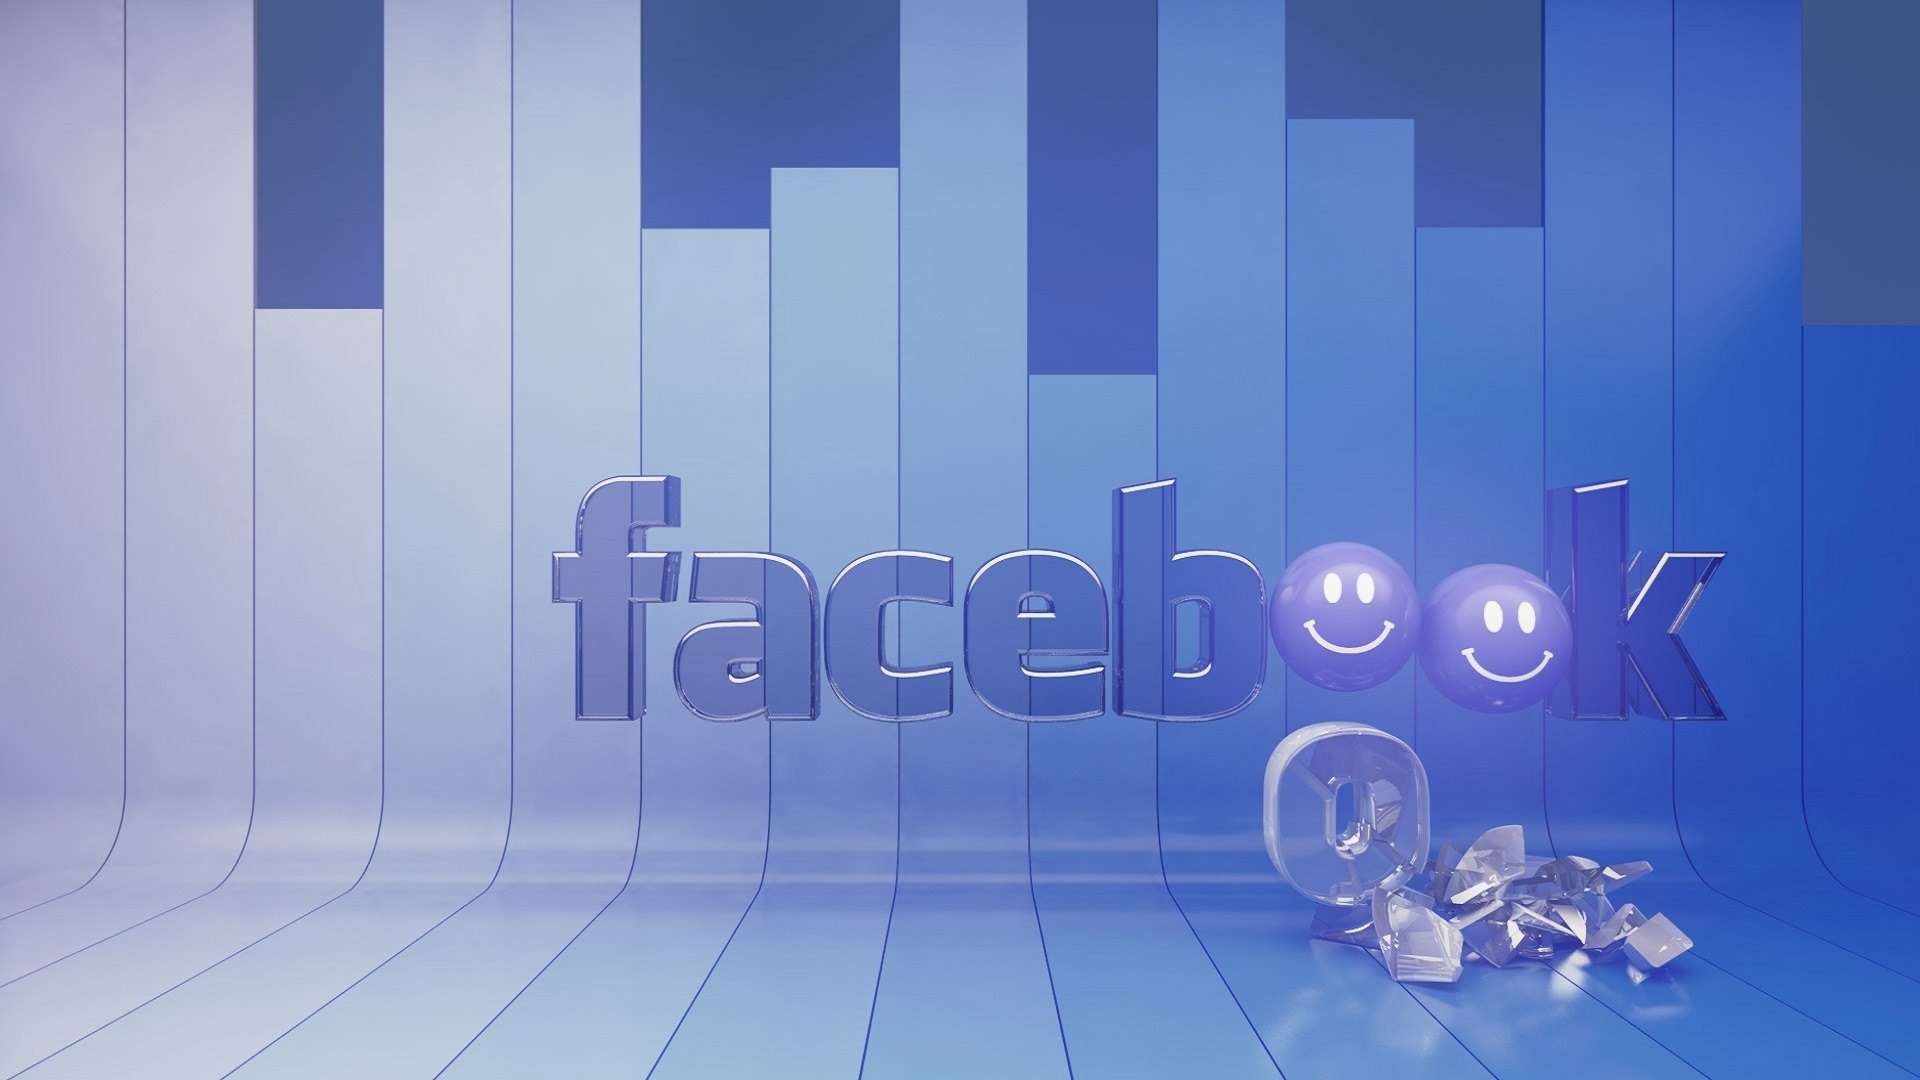 Facebook: The service was launched on February 4, 2004, as a Harvard-only social network. 1920x1080 Full HD Background.